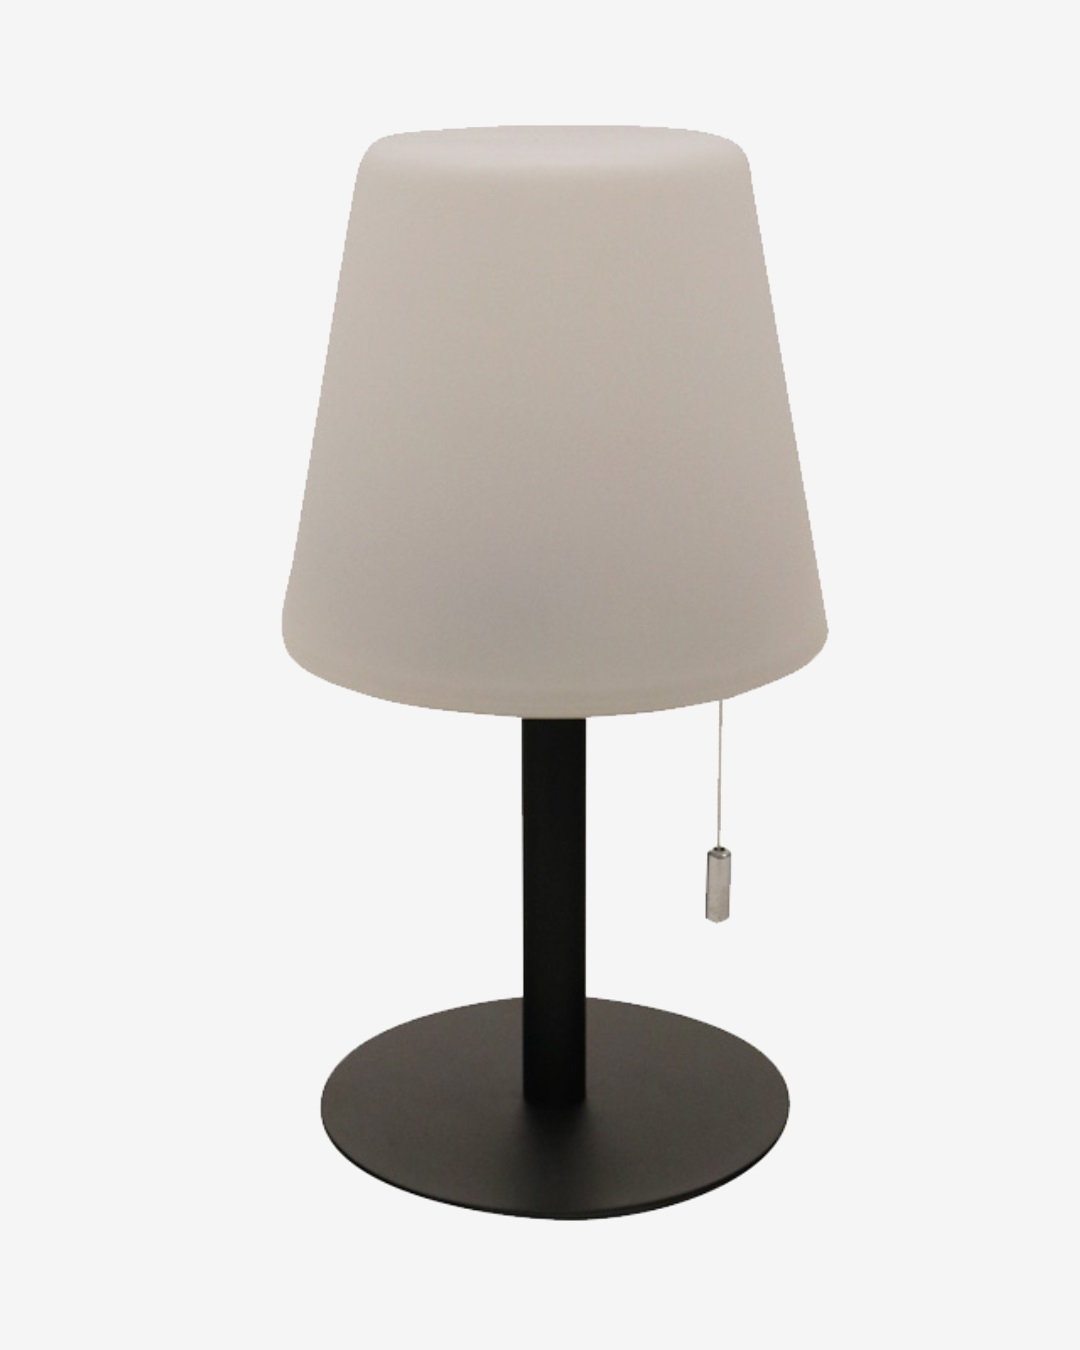 Table lamp with white shade and black base